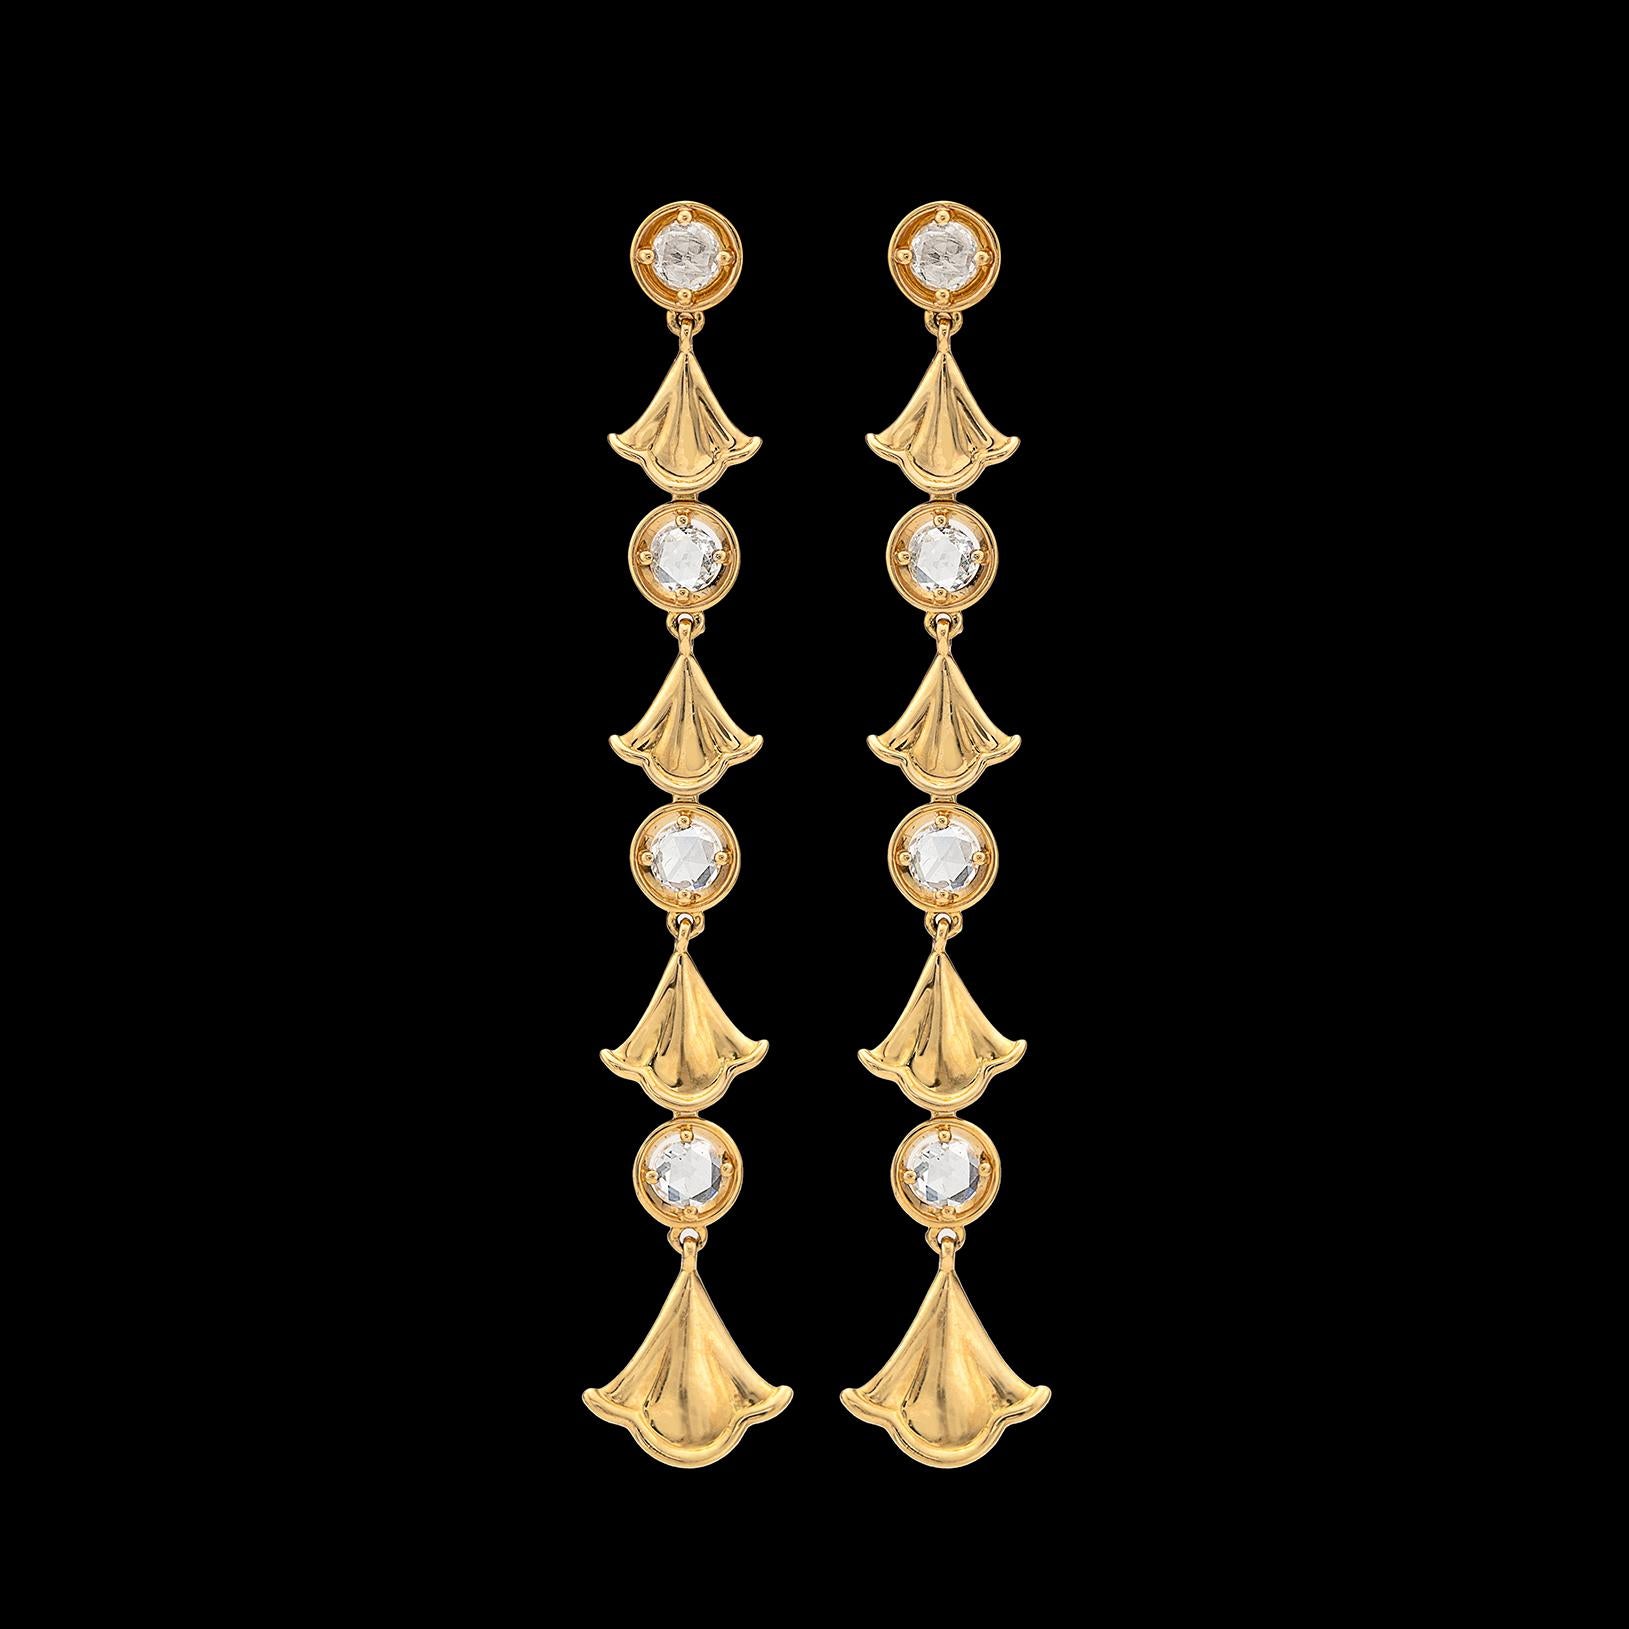 These elegant drop earrings will accent any outfit! By Marina B. of the famed Bulgari family, the 18k gold drops are designed with ginko leaf links alternating with rose-cut diamond links, with a total diamond weight of 0.74 carats. The earrings